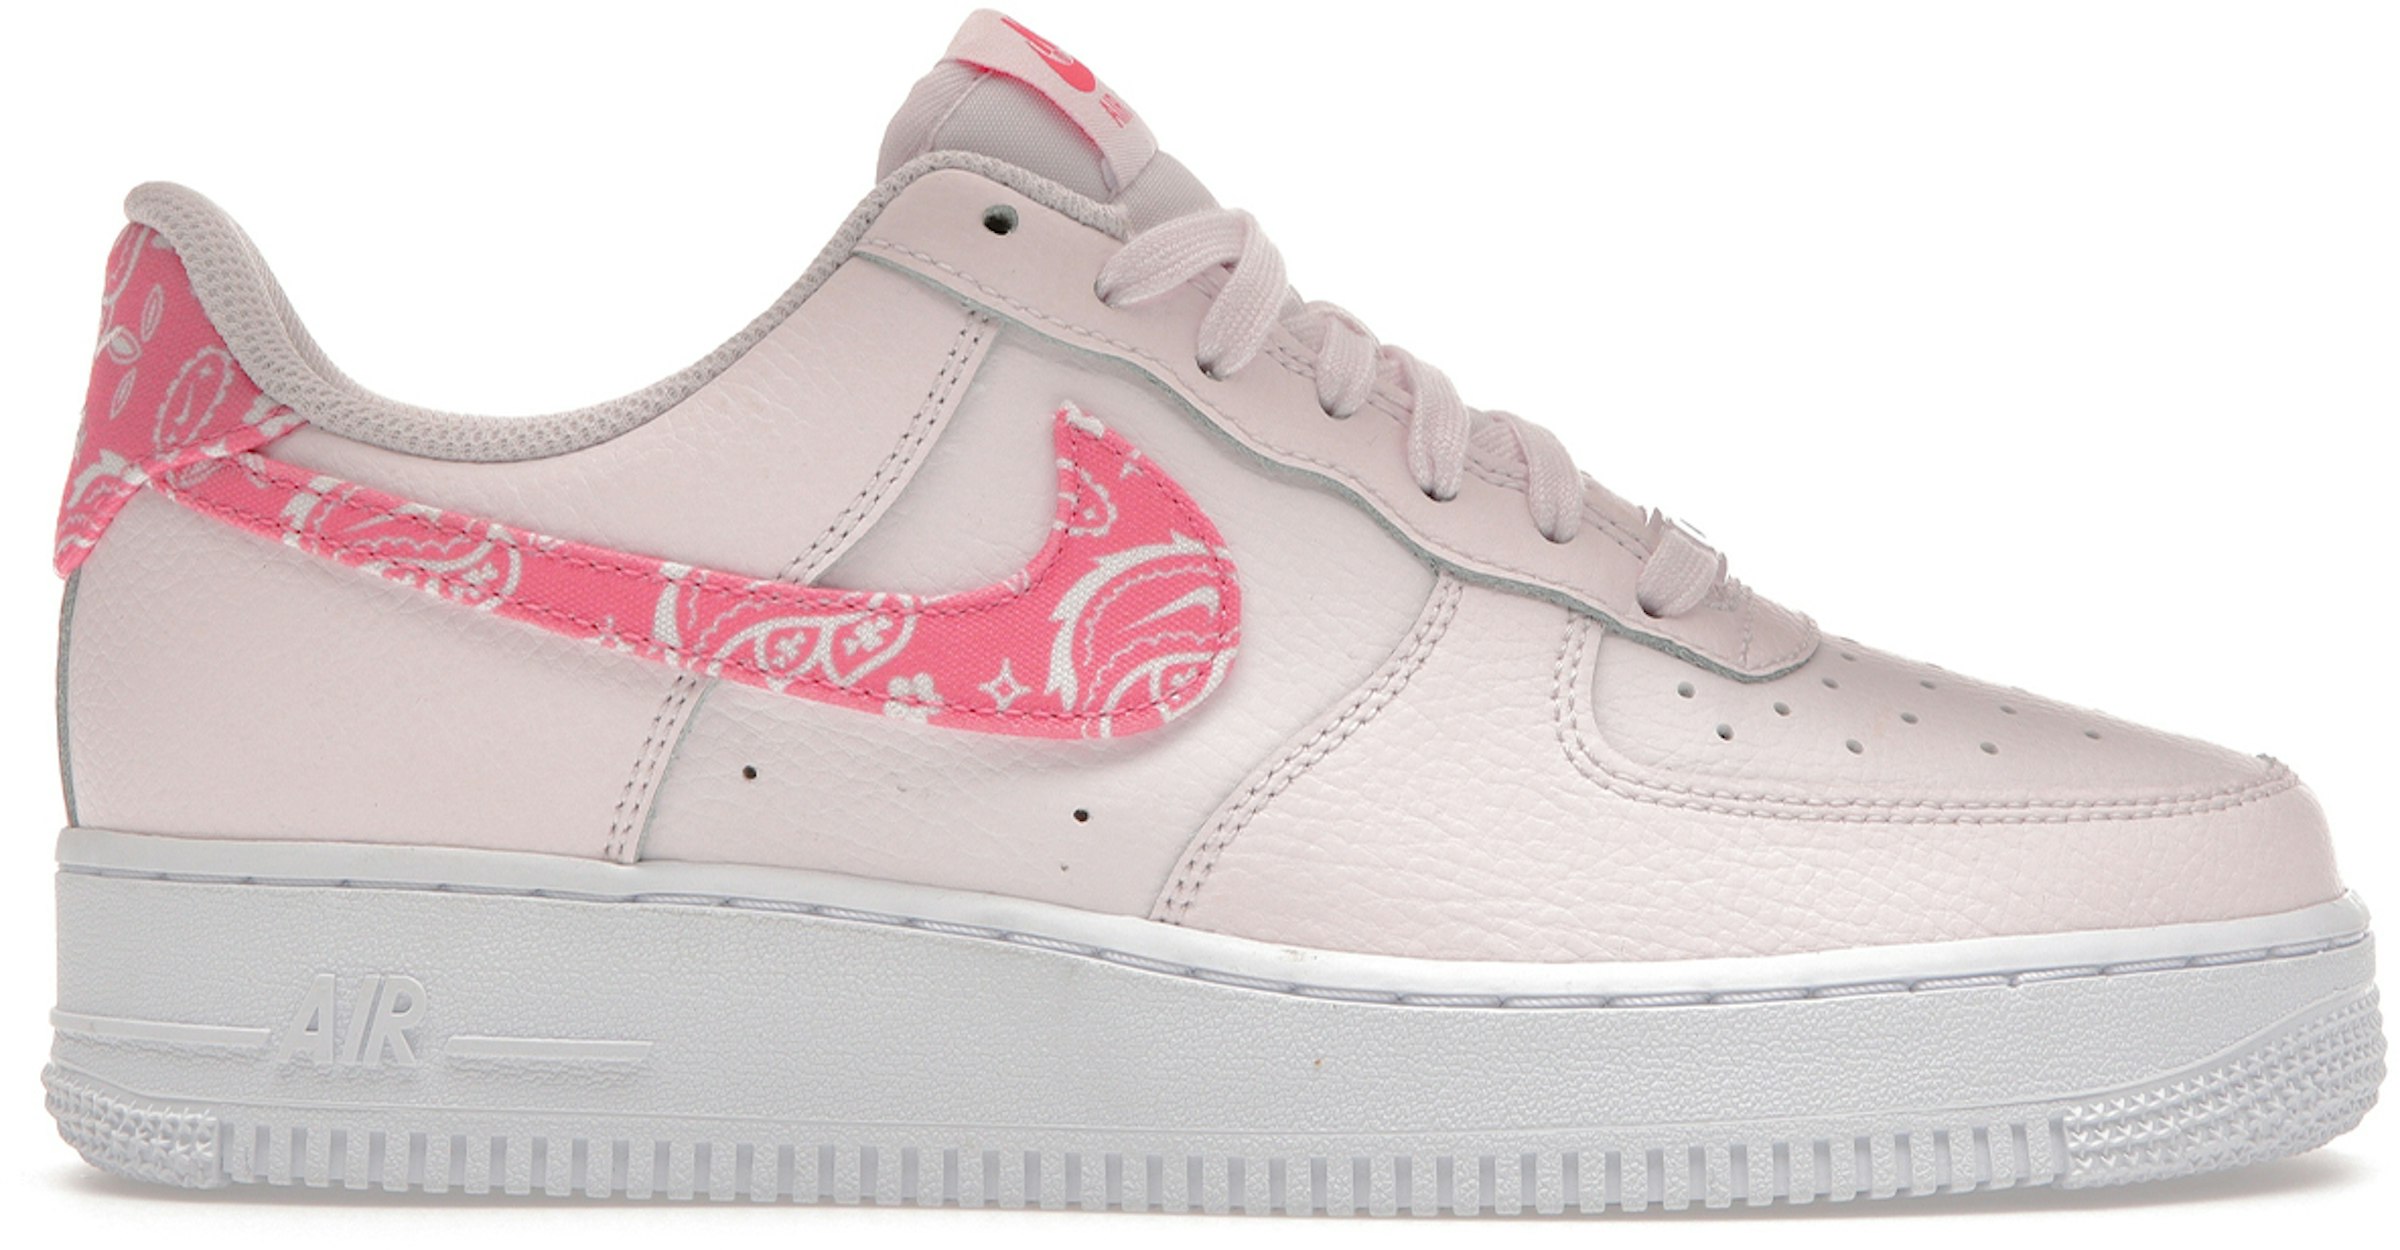 Nike Air Force 1 Low '07 Paisley Pack Pink (Women's) - US